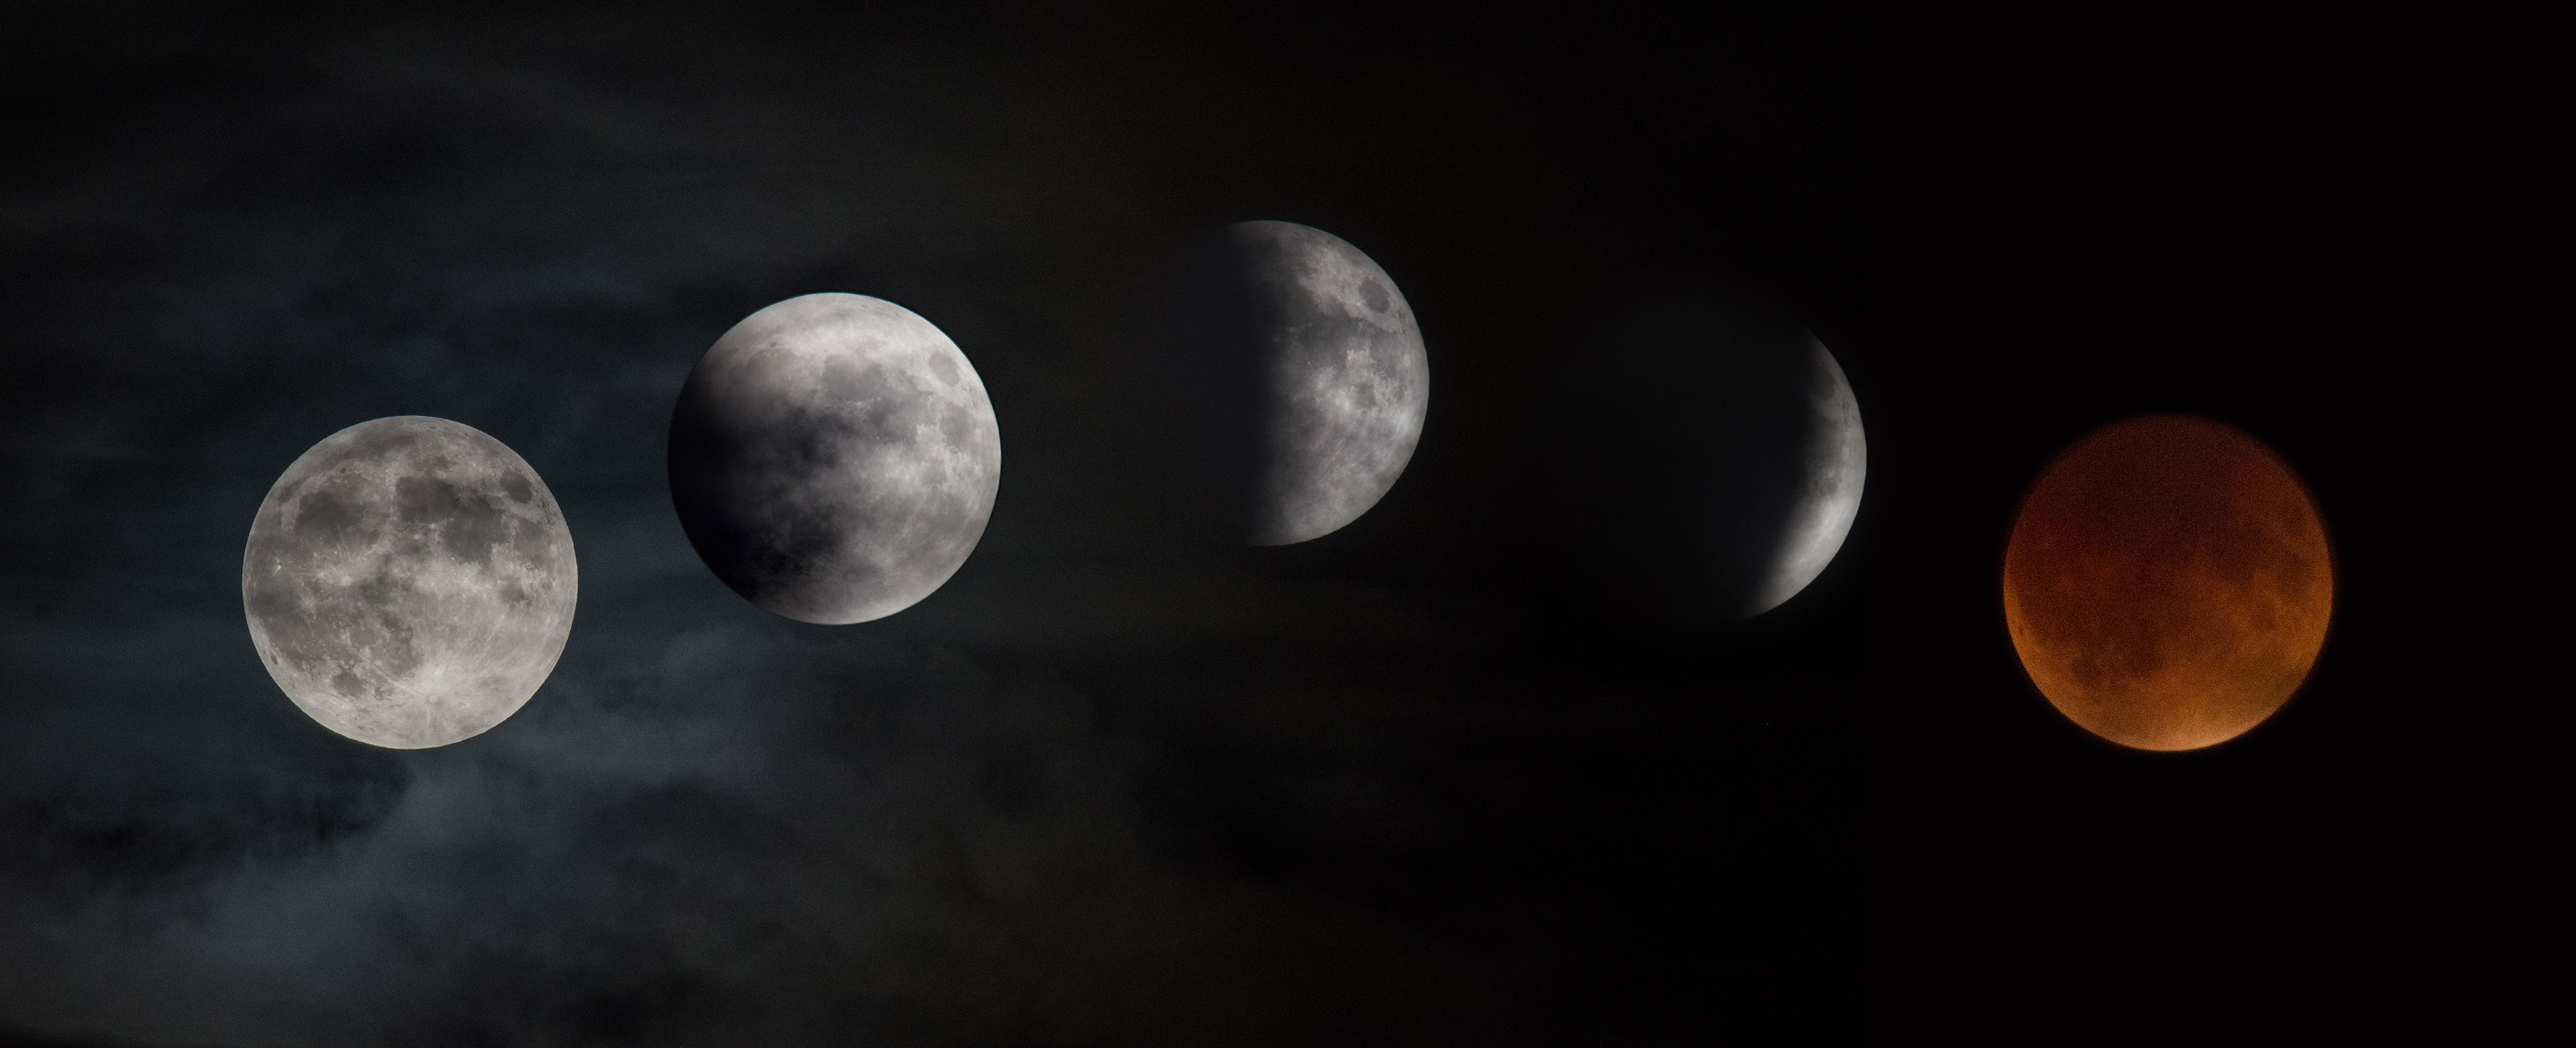 How To Watch The Only Total Lunar Eclipse Of Plus A